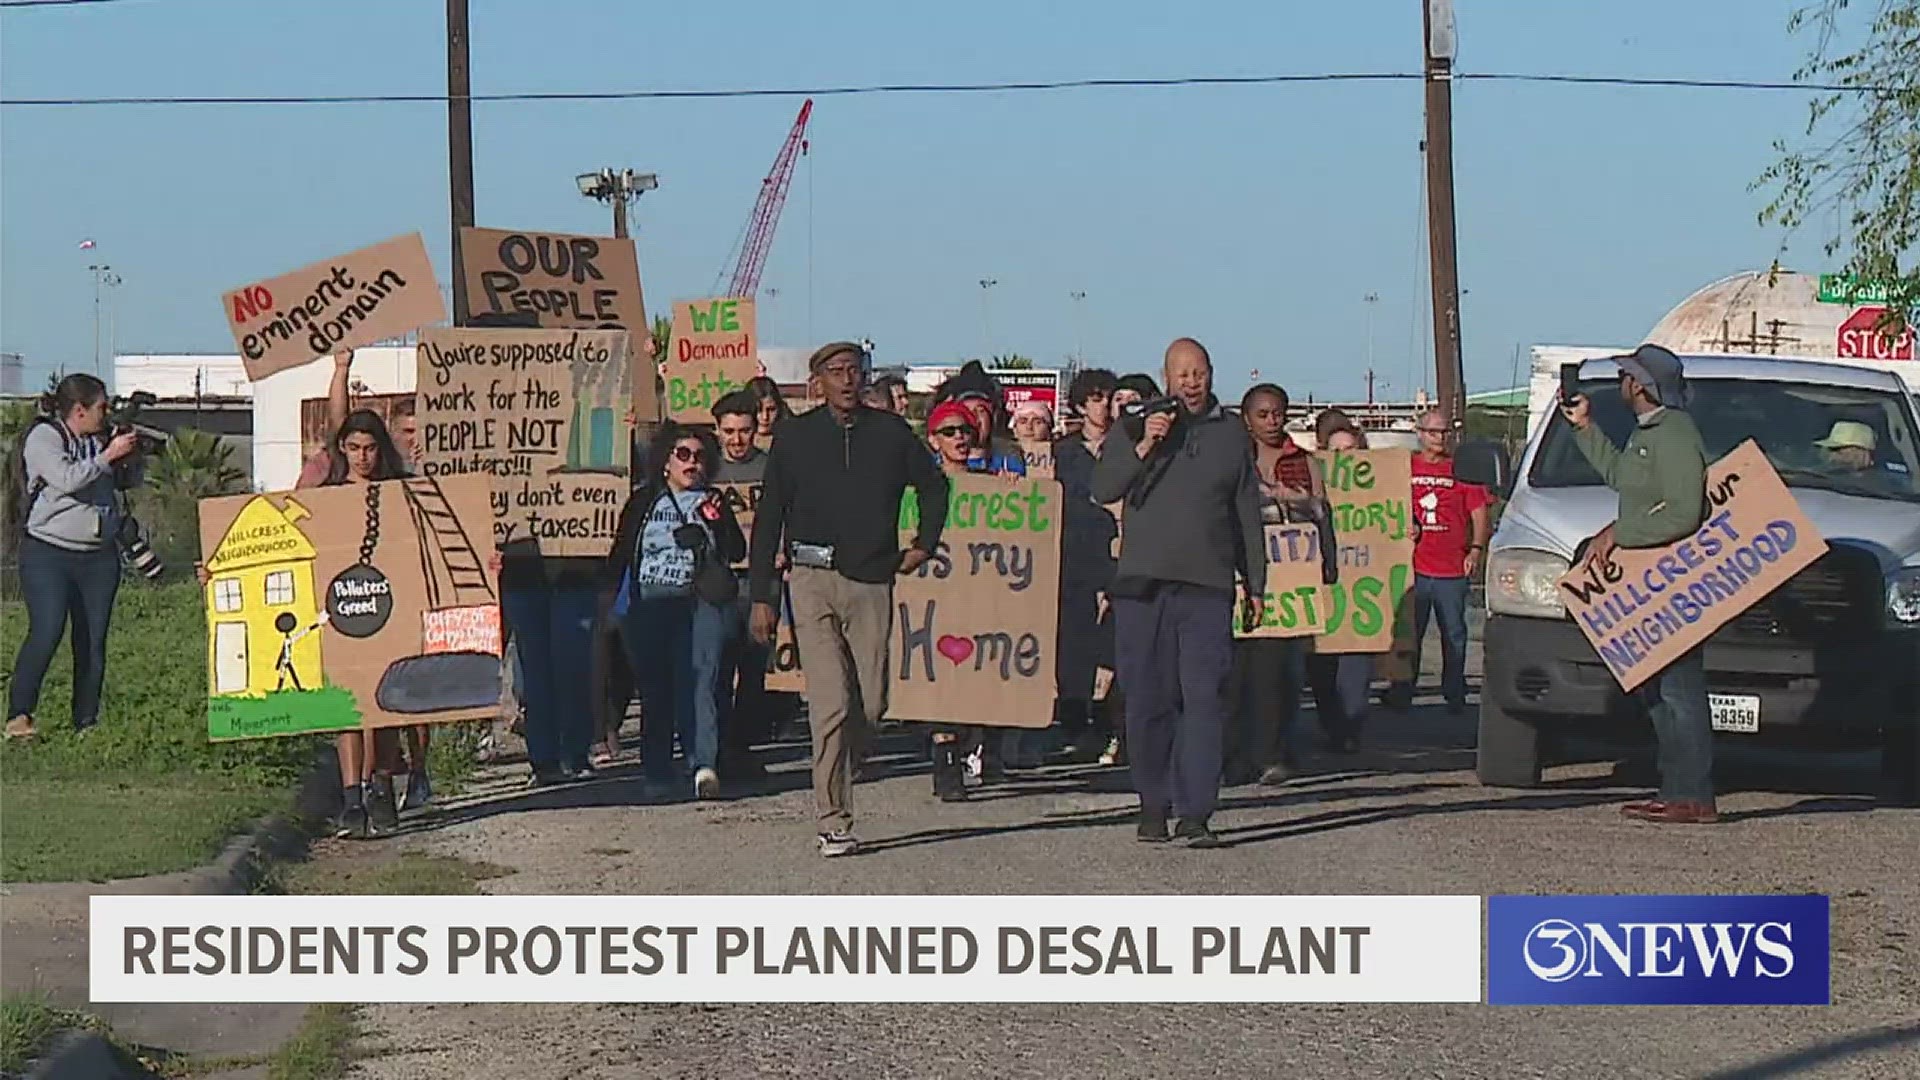 The Hillcrest Residents Association not only took their message to the streets, but said they also plan to continue to fight to keep the plant from being built.